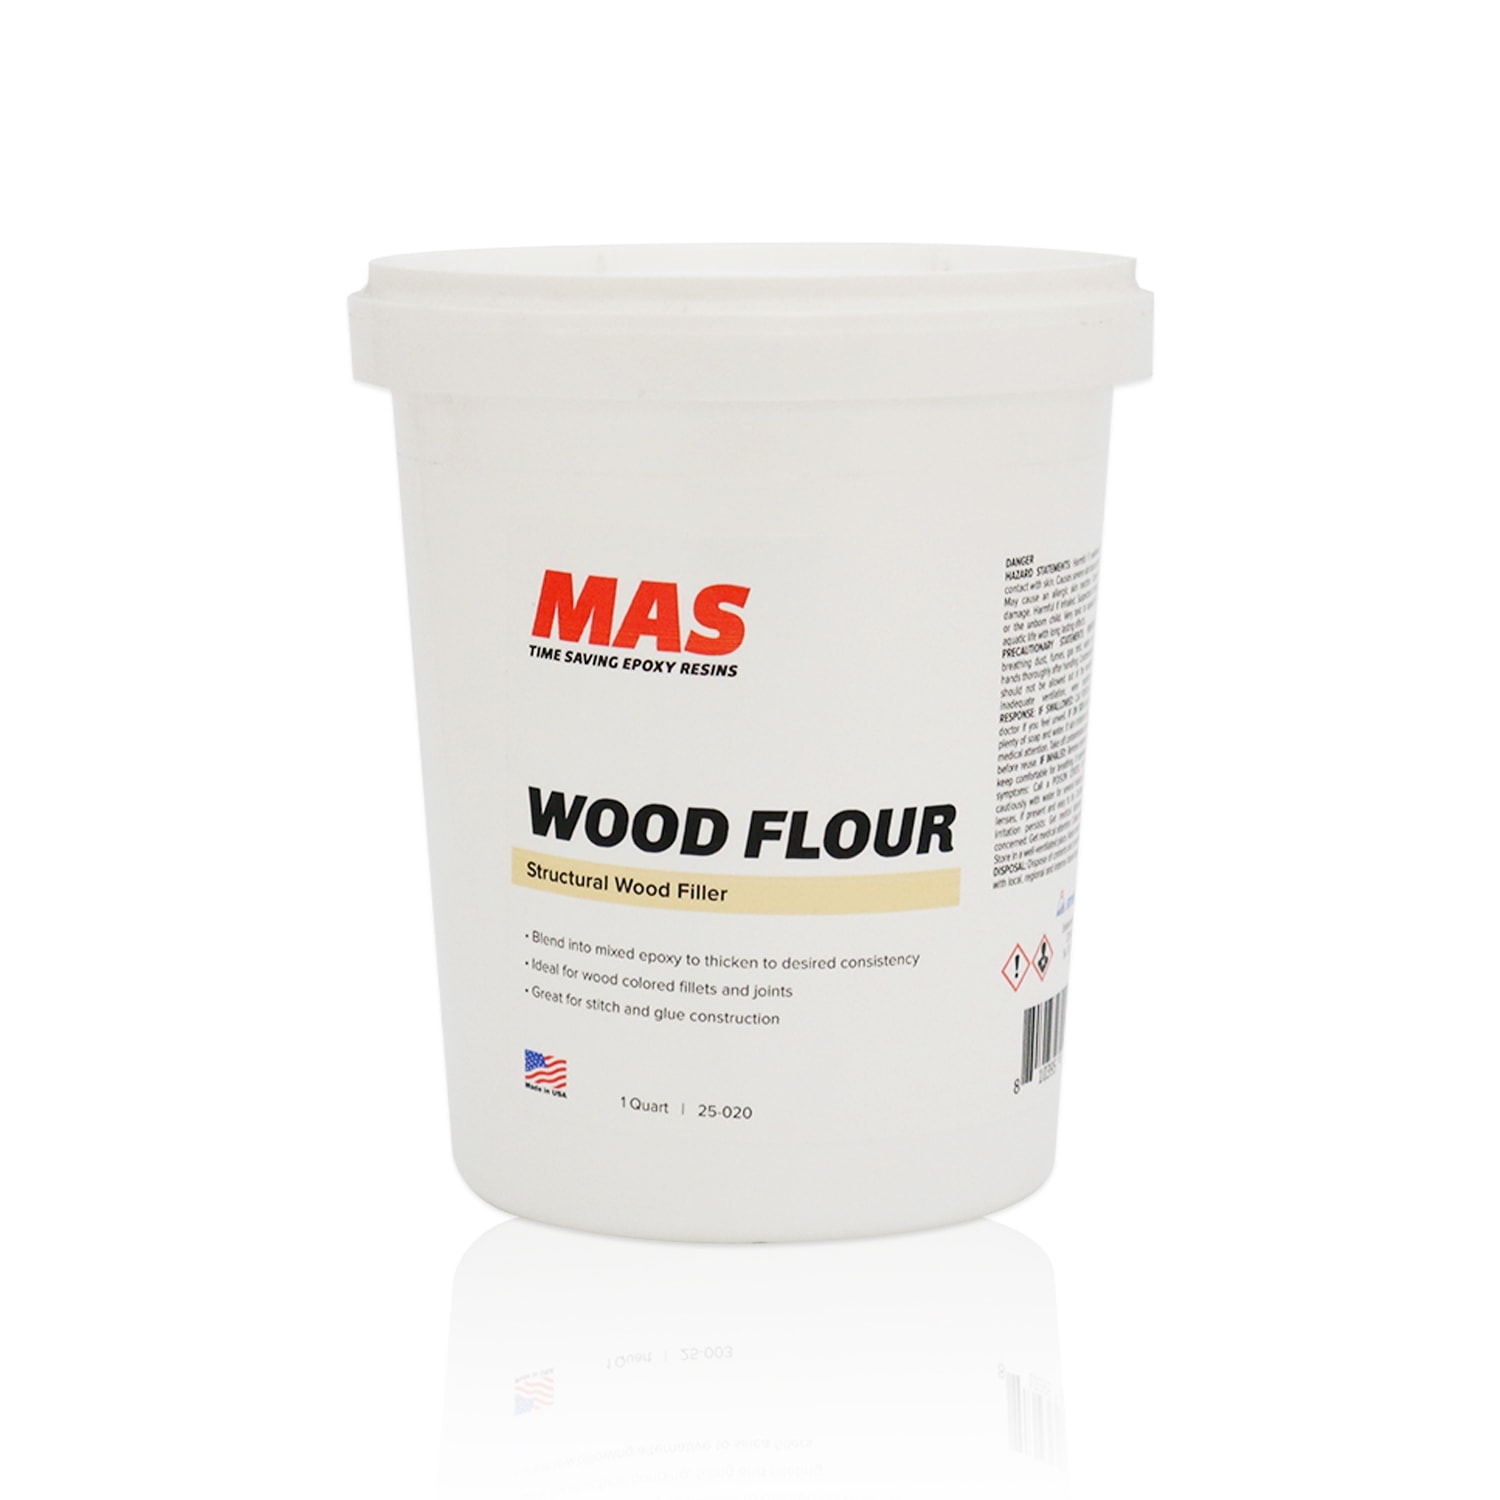 Is wood flour for epoxy resin